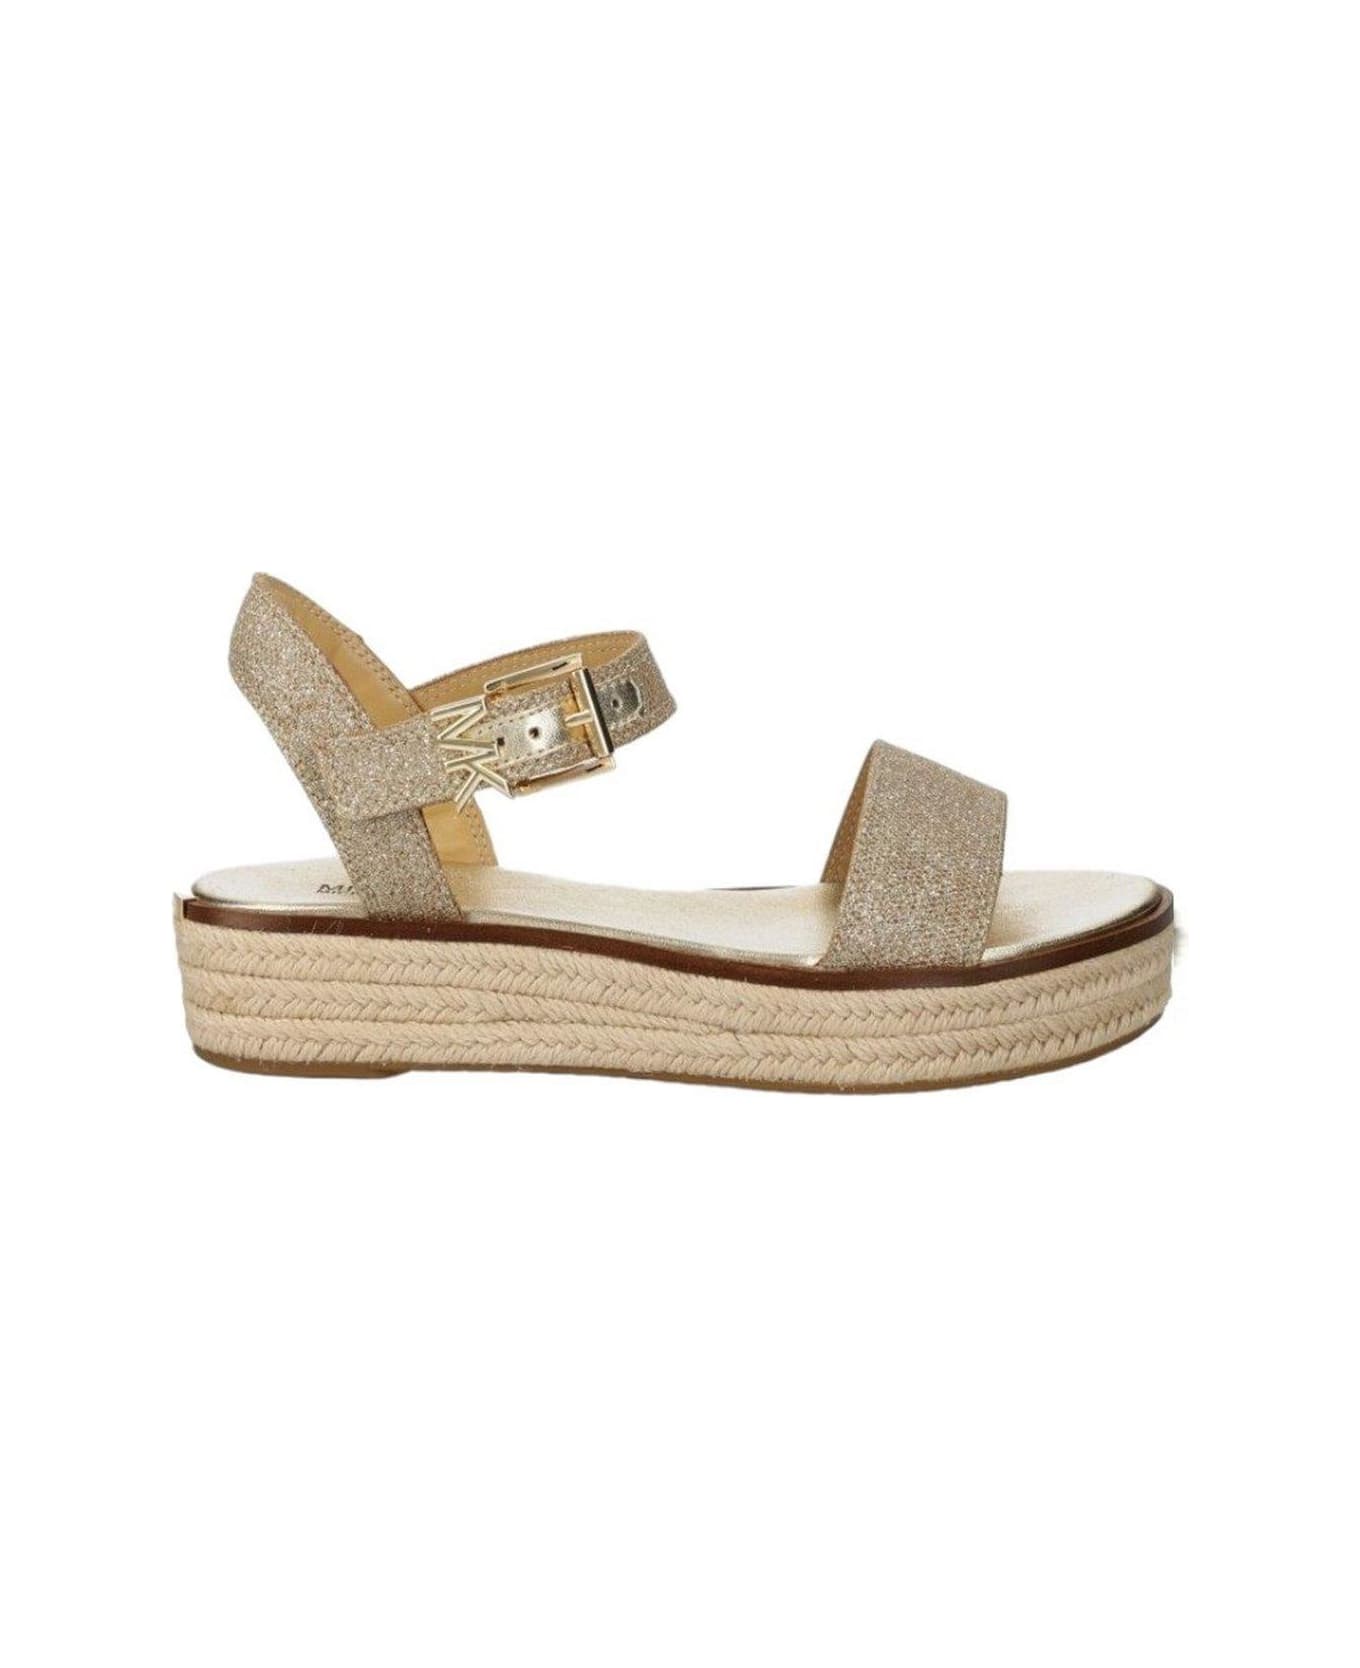 Michael Kors Richie Glitter Buckle-fastened Sandals - Champagne